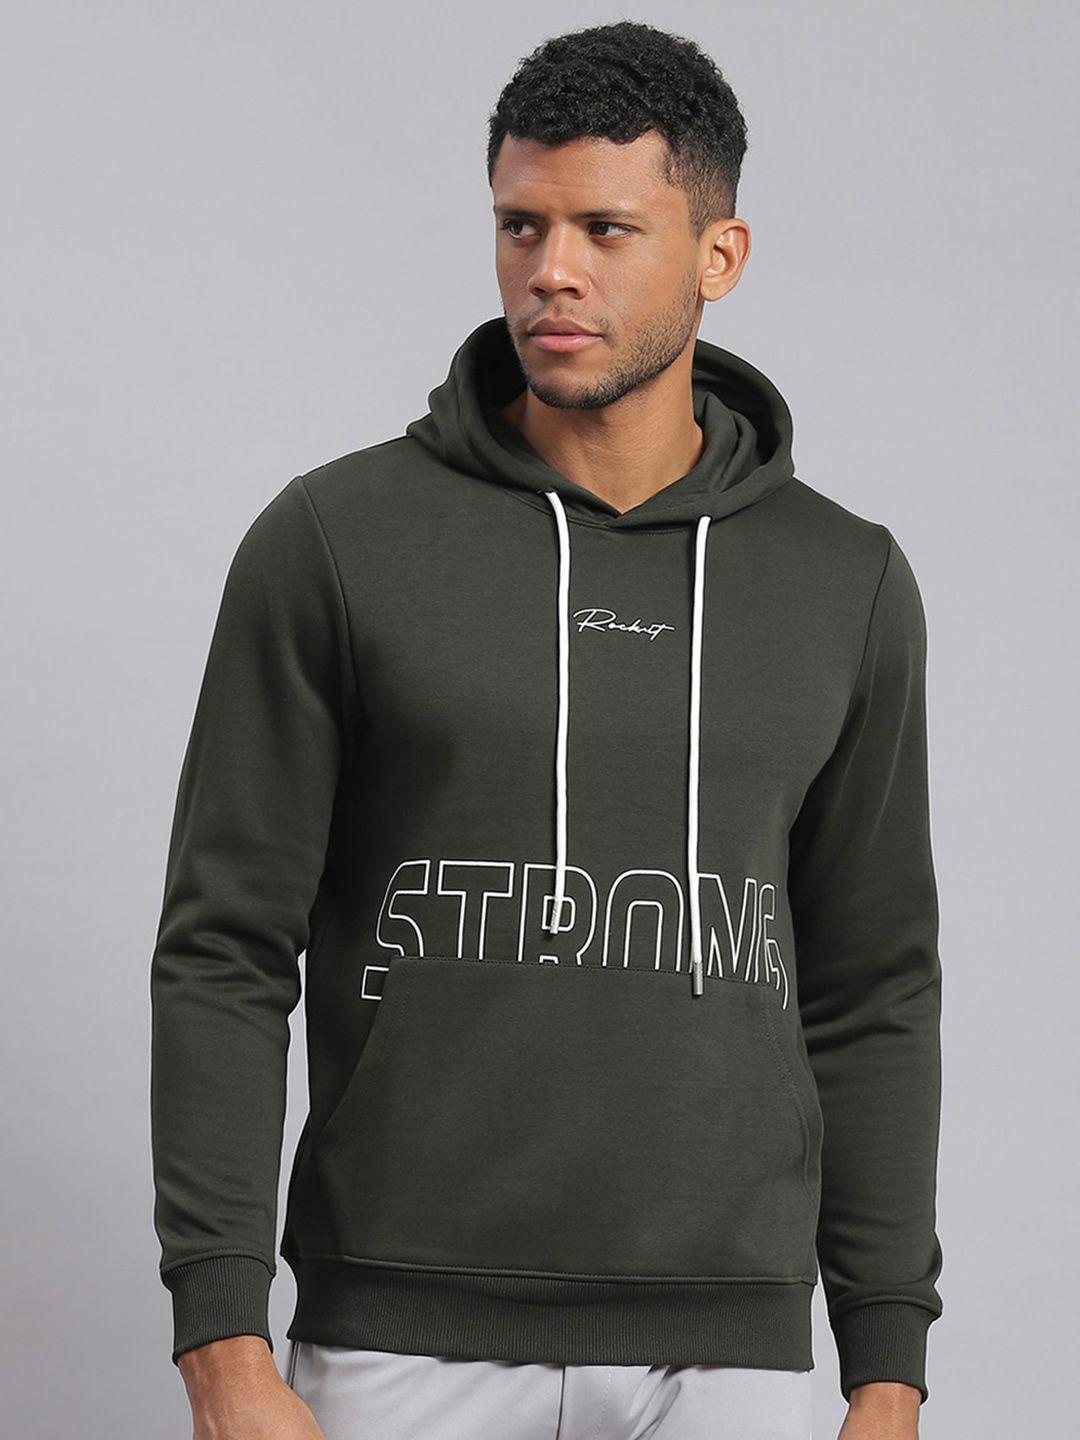 rock.it typography printed hooded pullover